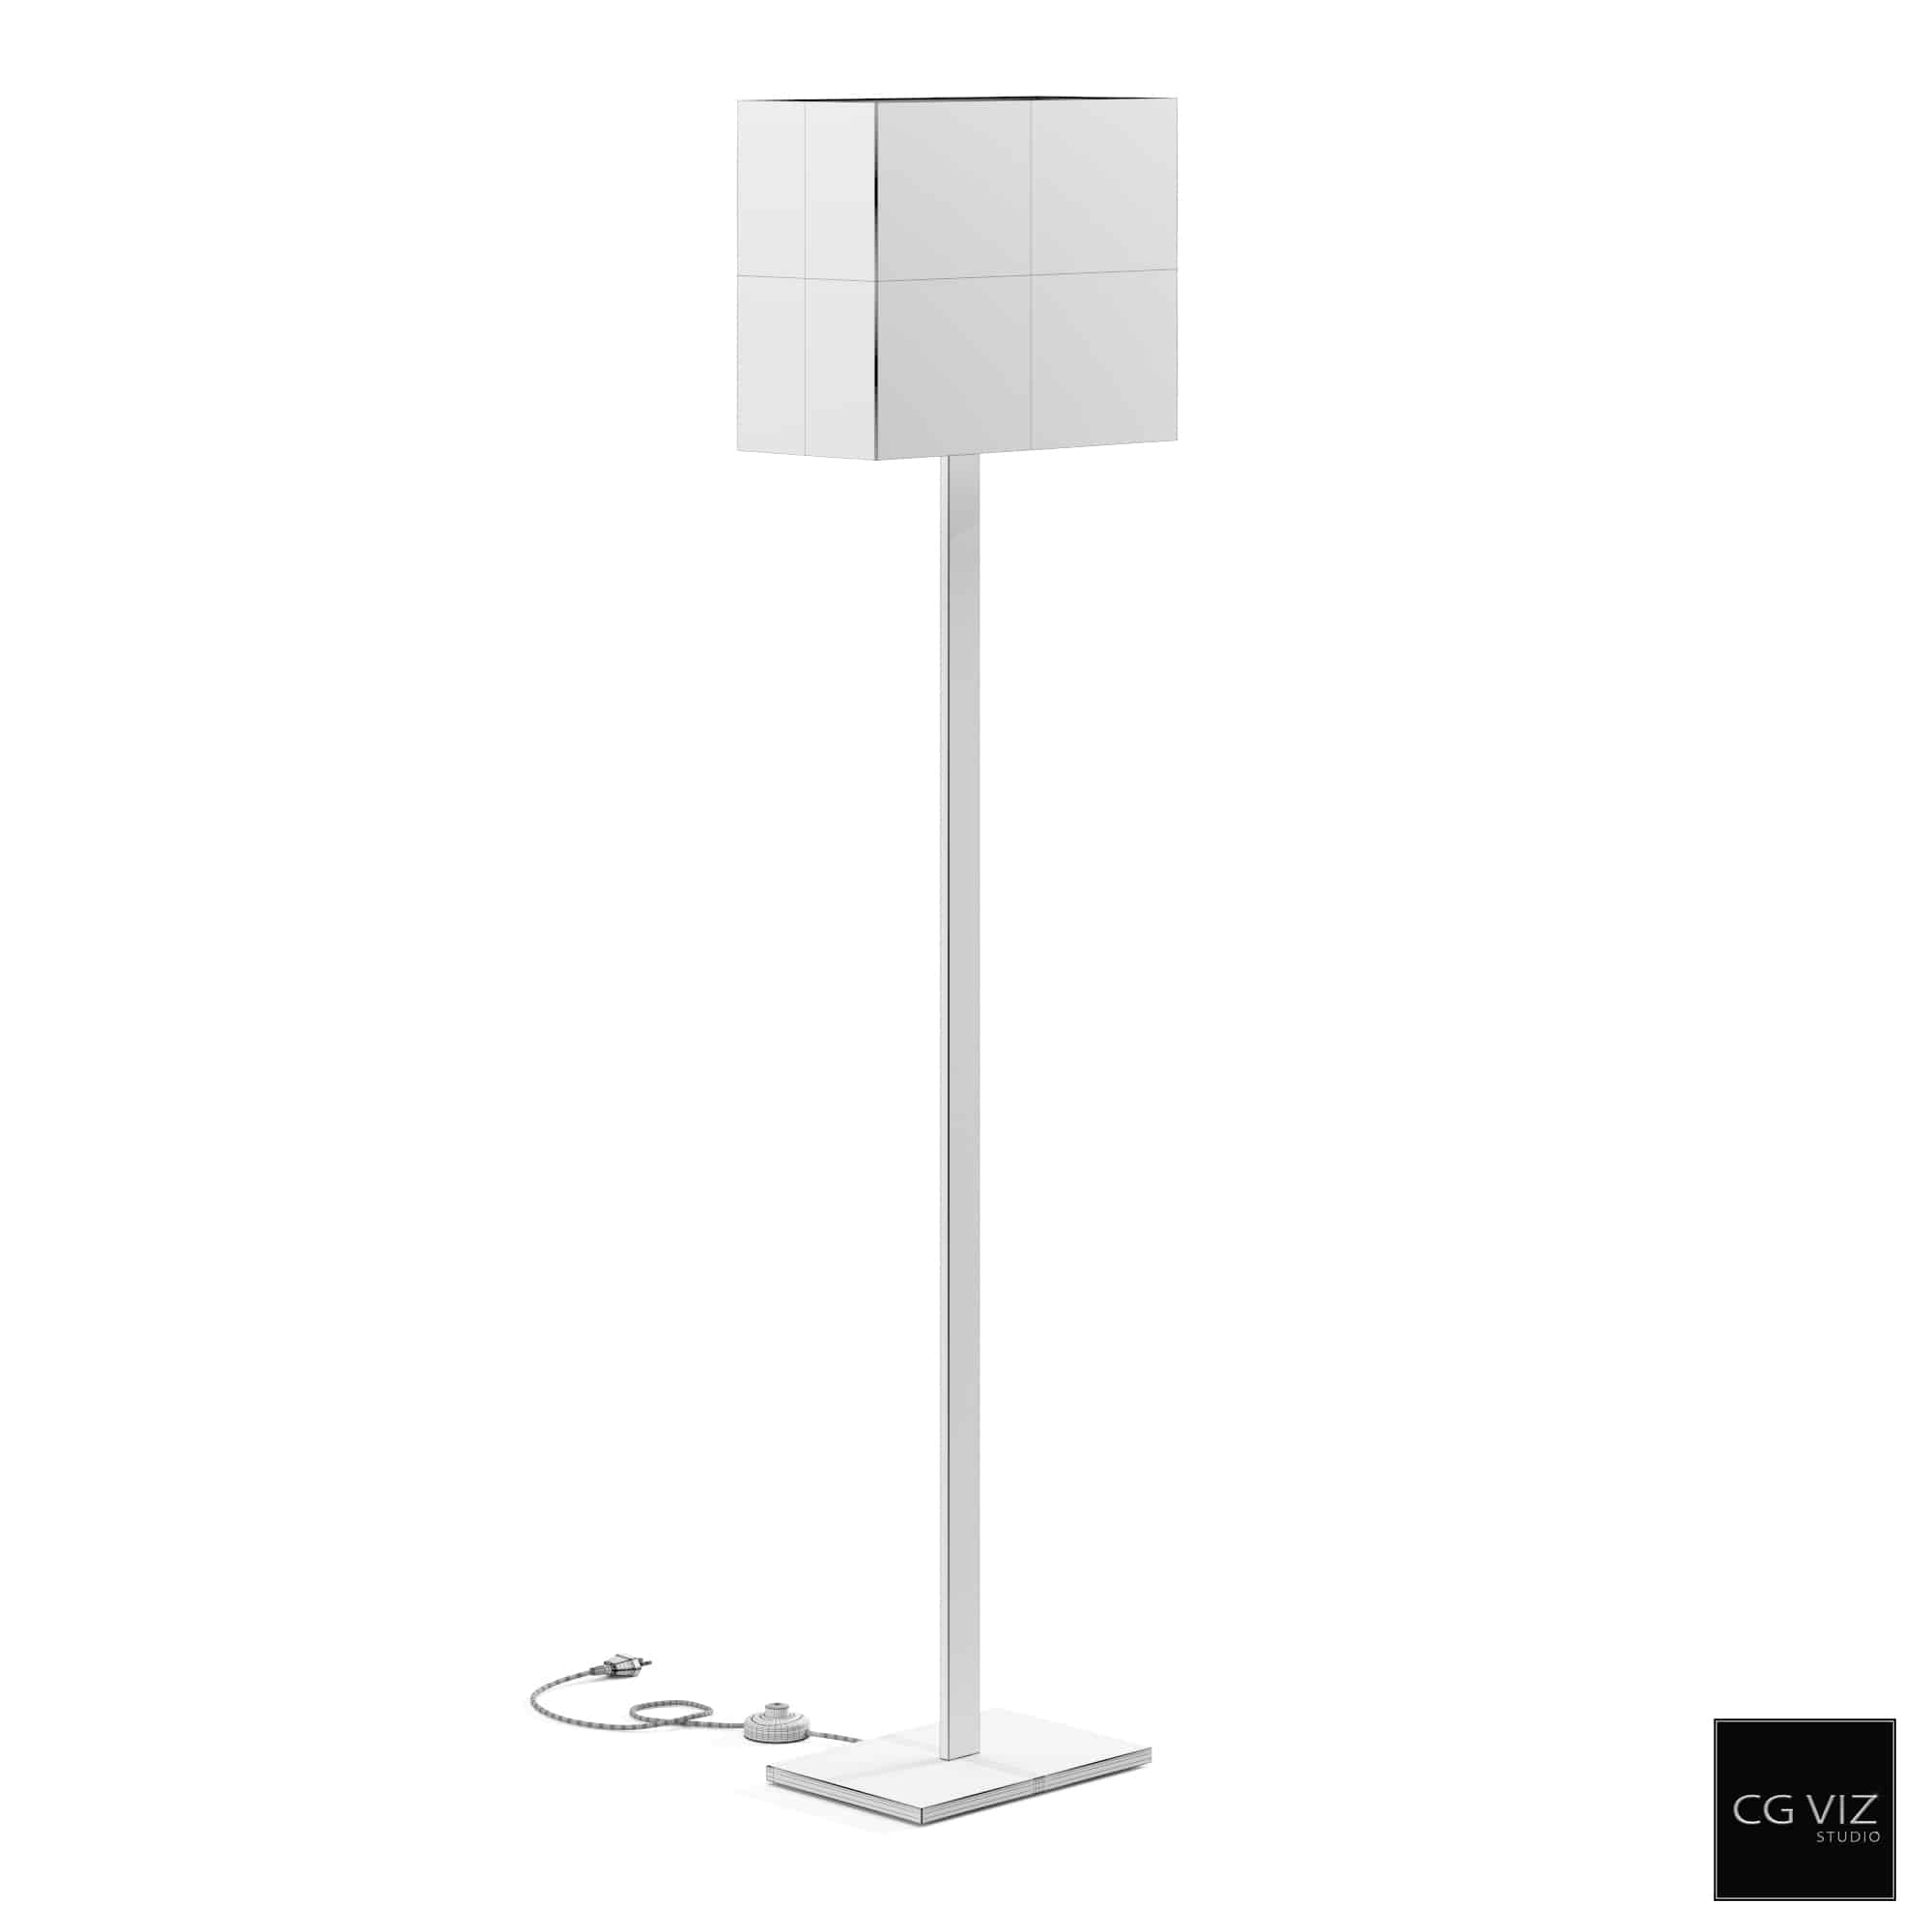 Wireframe View of Ikea Tomelilla Floor Lamp 3D Model